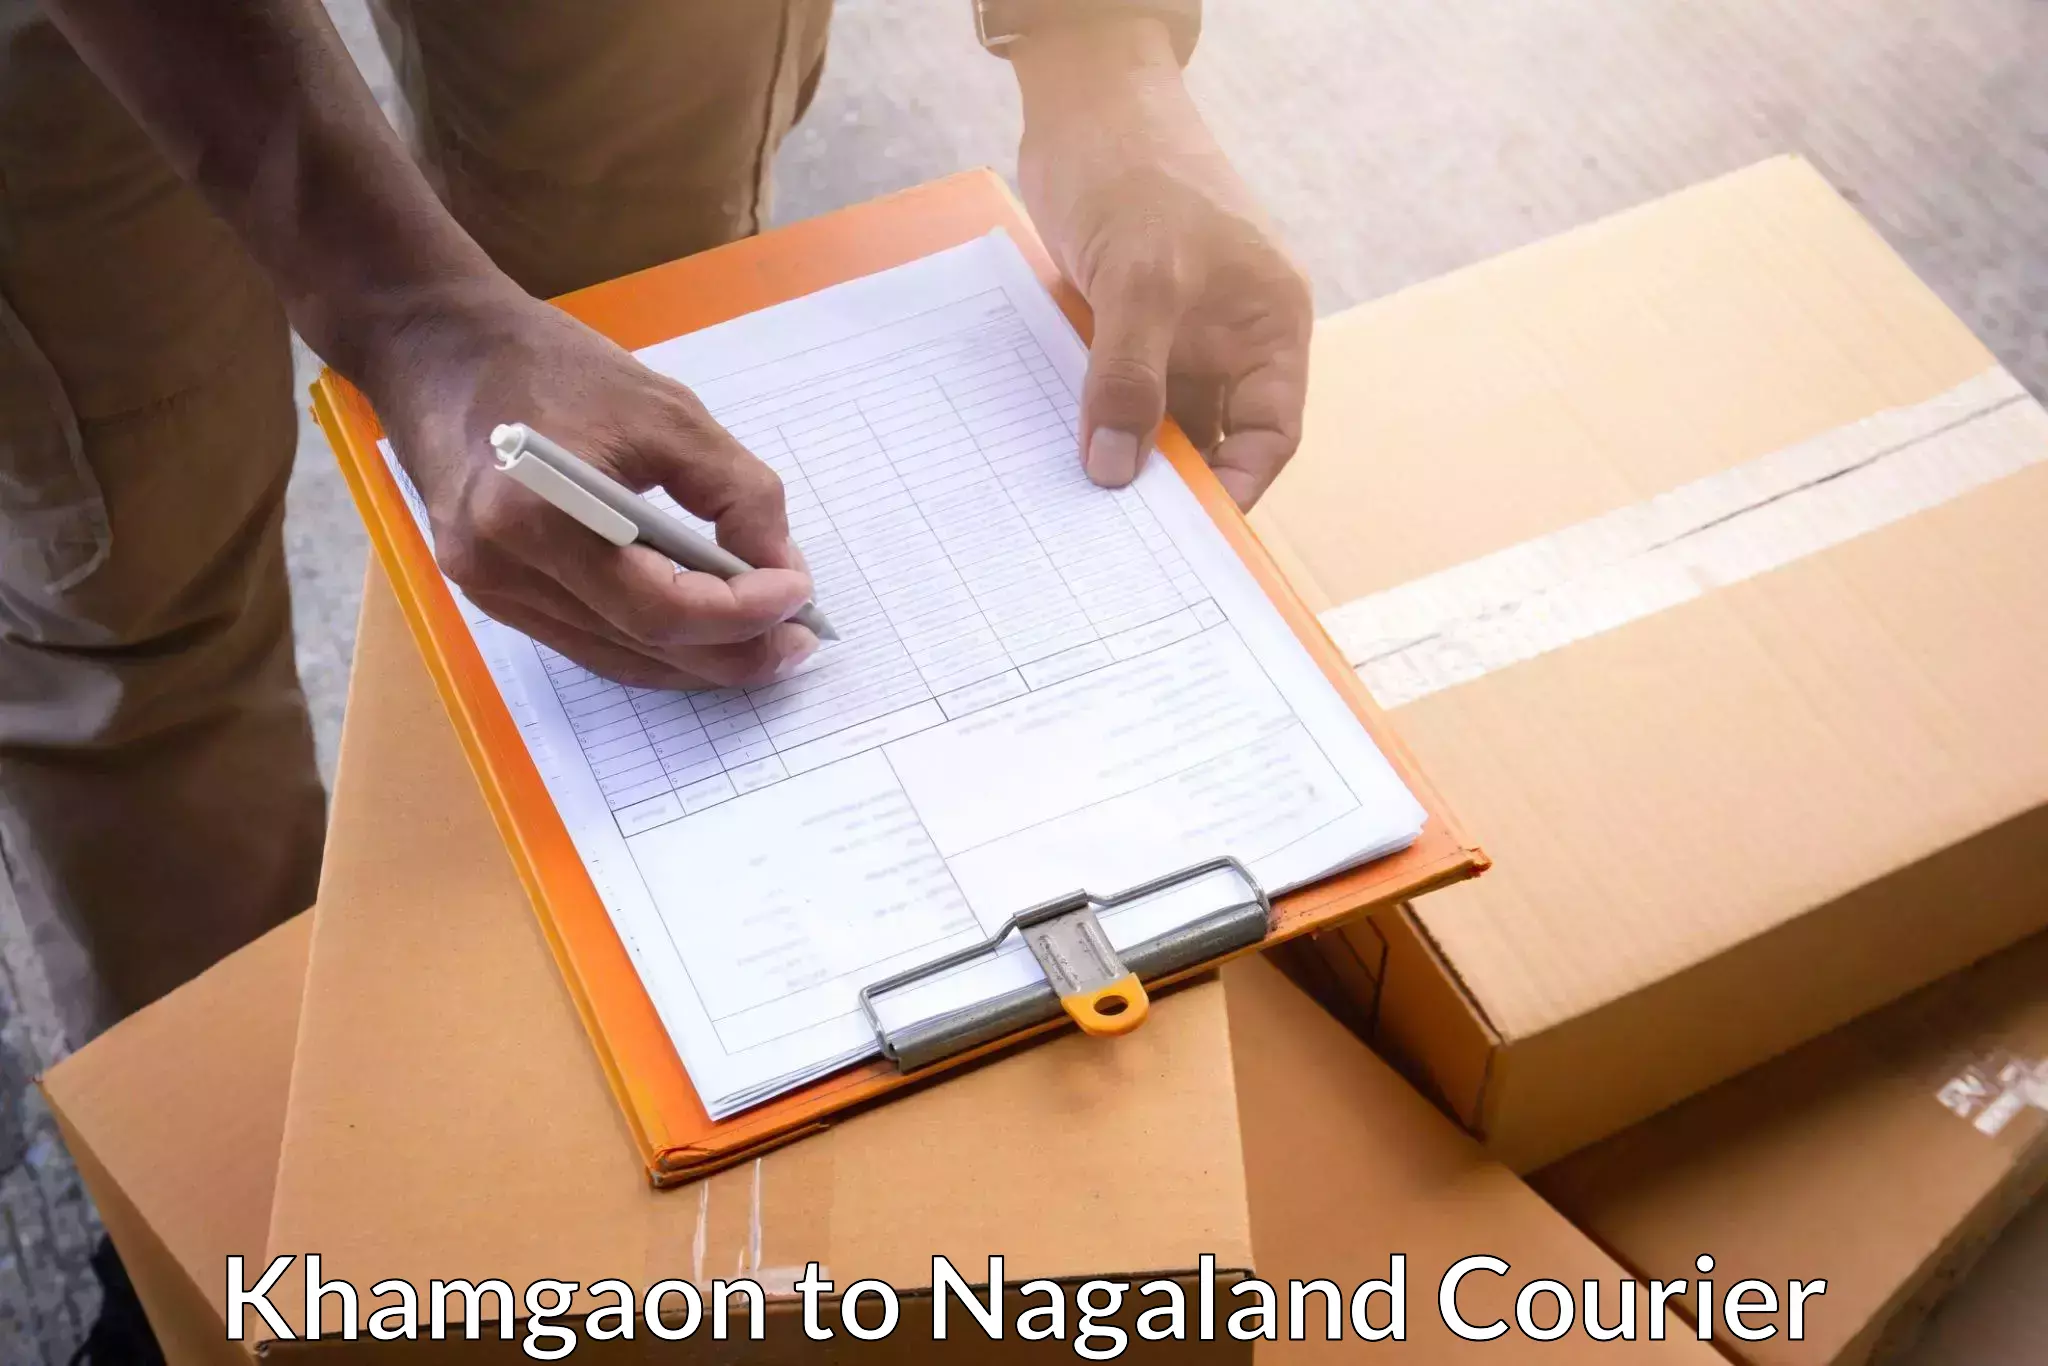 Emergency parcel delivery in Khamgaon to Dimapur